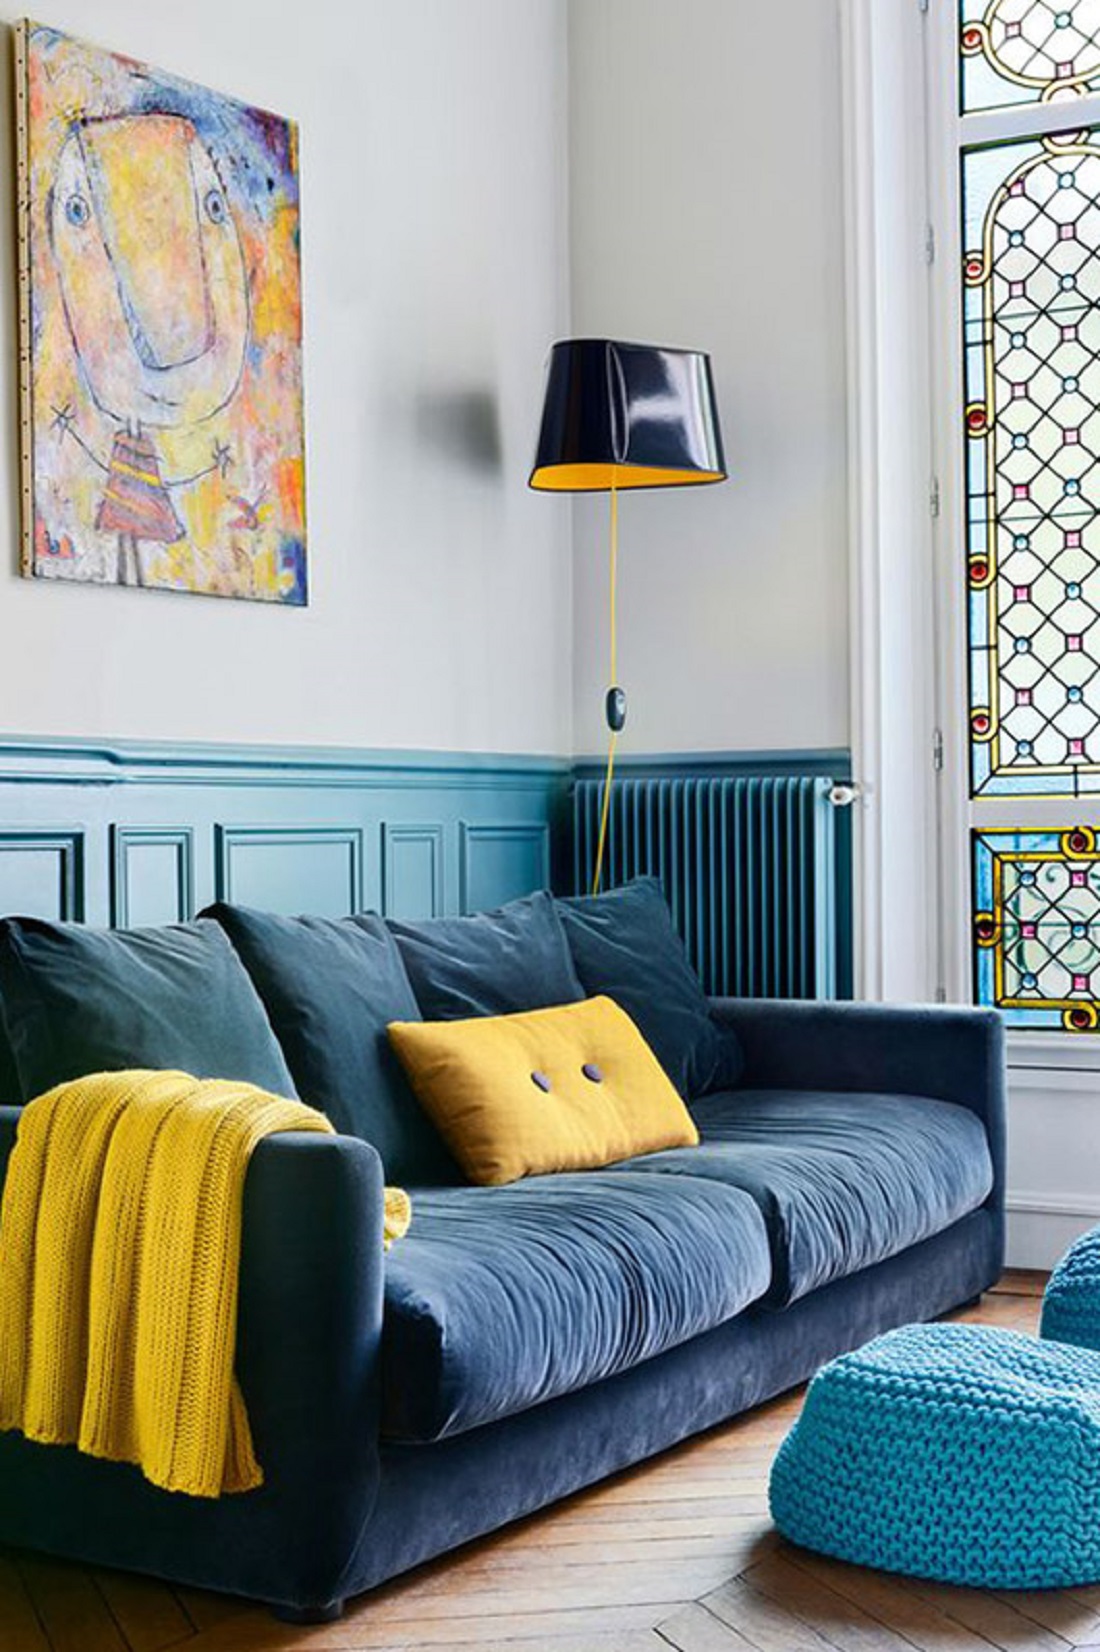 @projectfairytale: Parisian Apartment Full of Charm and Color